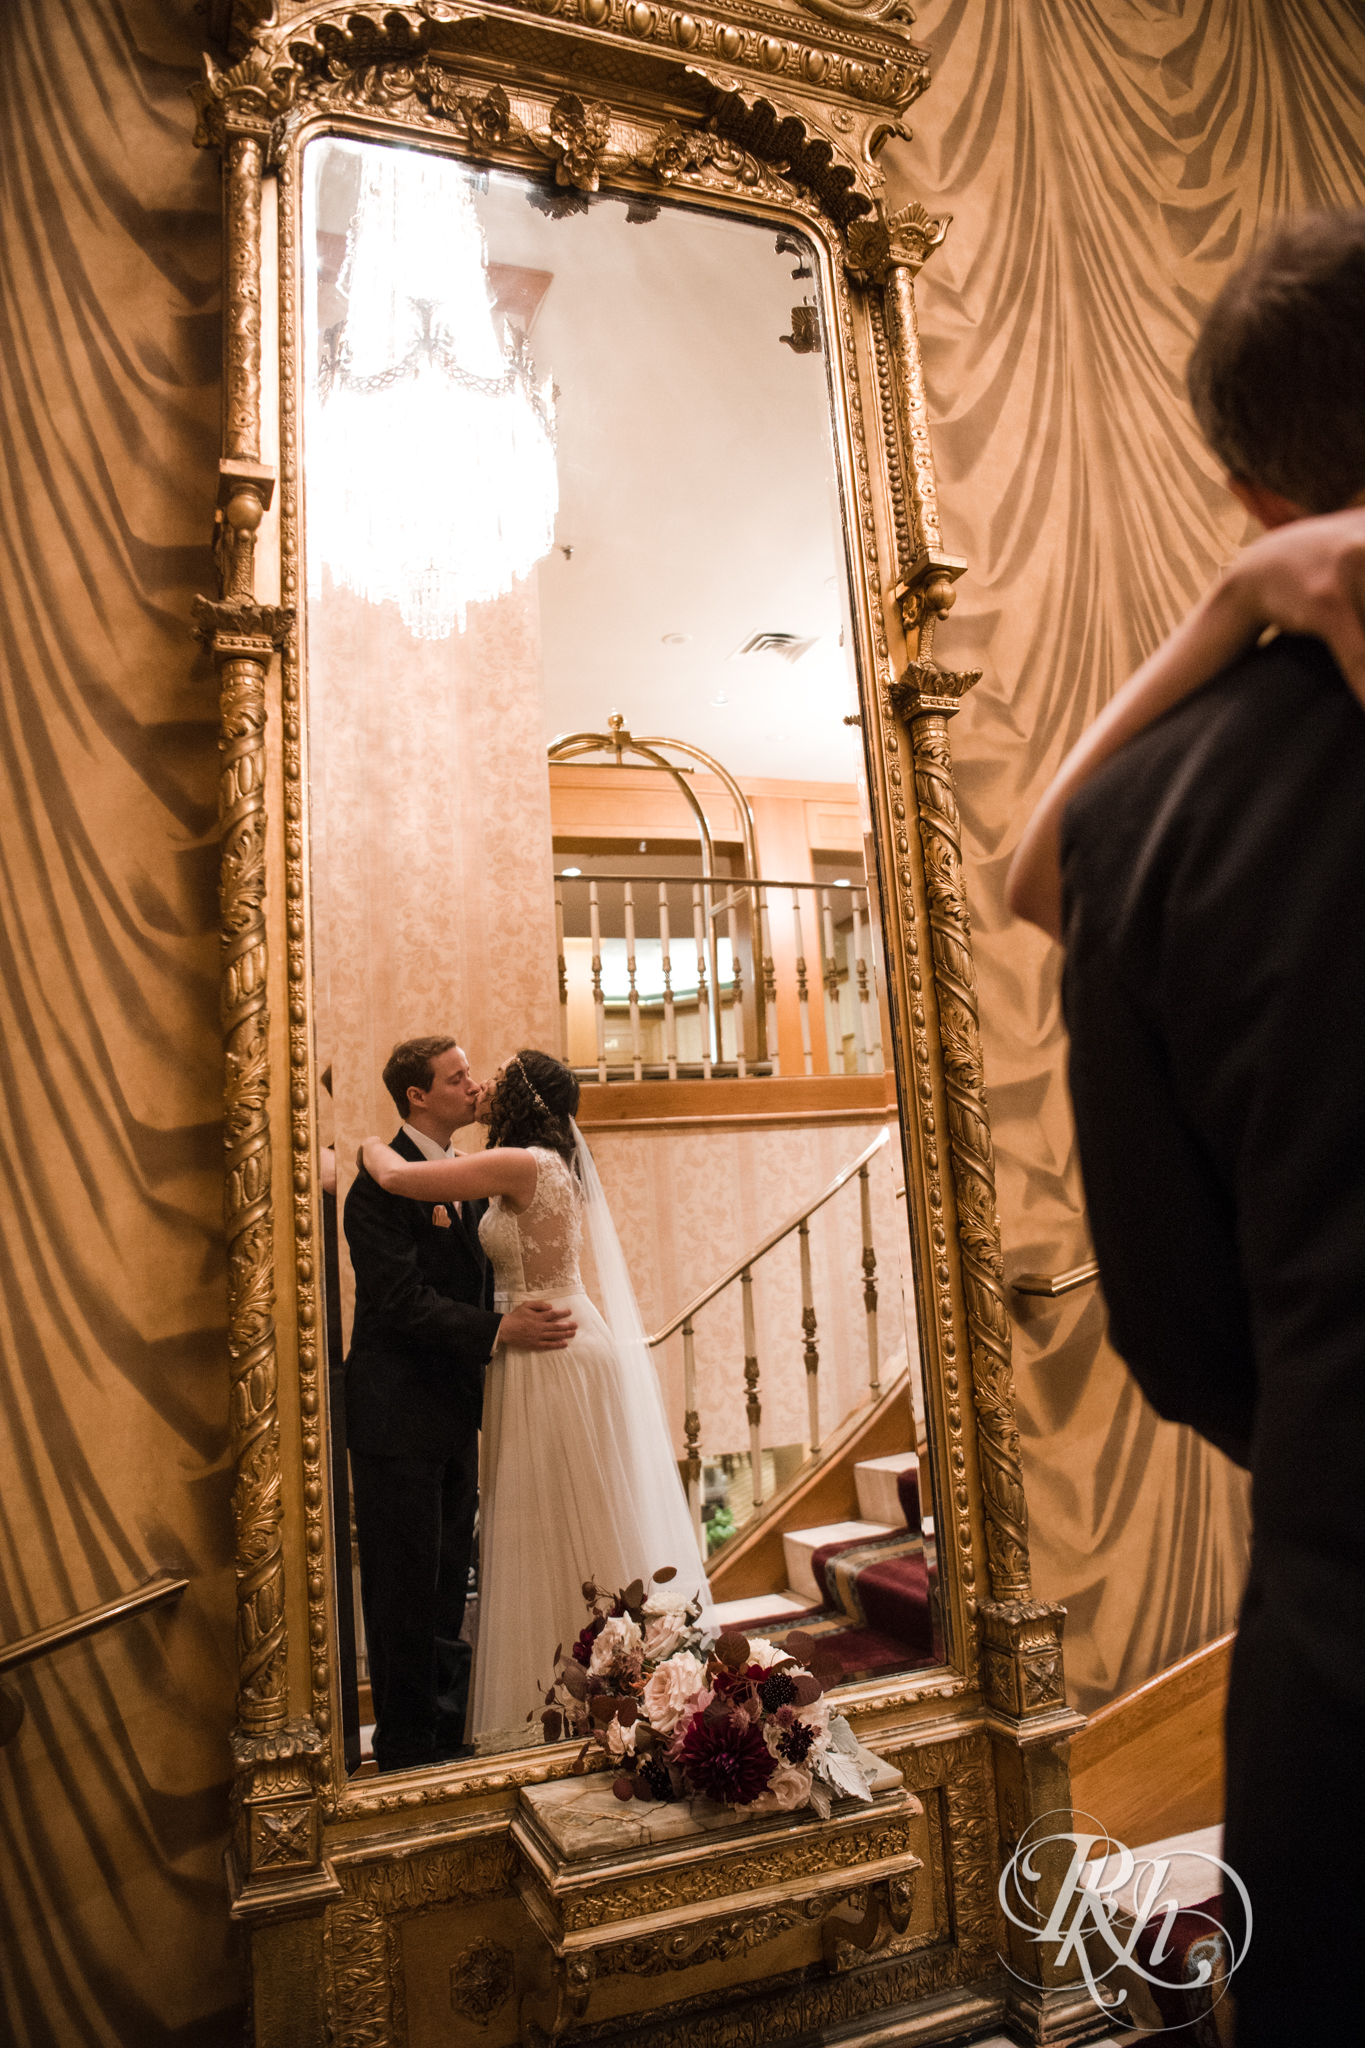 Bride and groom kiss in front of mirror at the Saint Paul Hotel in Saint Paul, Minnesota.